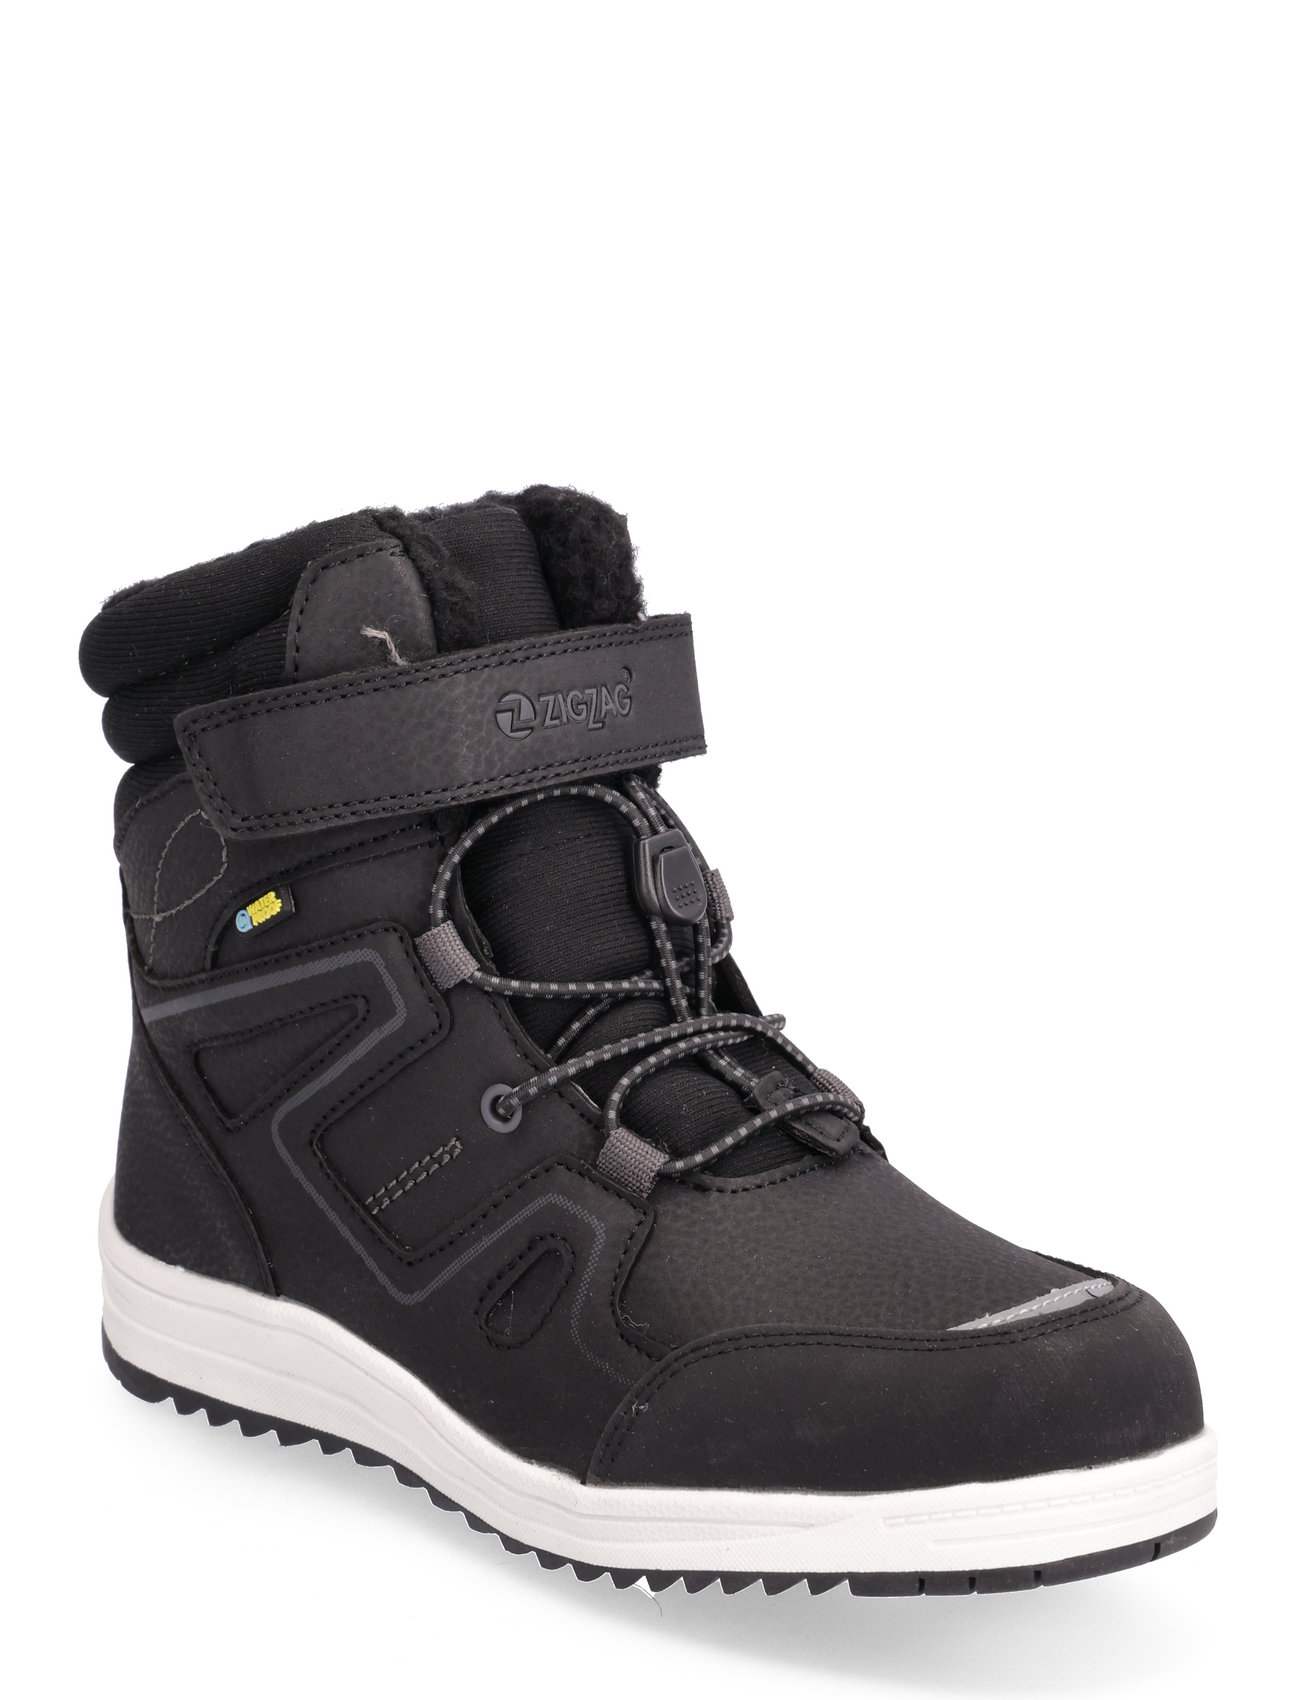 ZigZag Rincet Kids Winterboot Wp - Boots | Boots